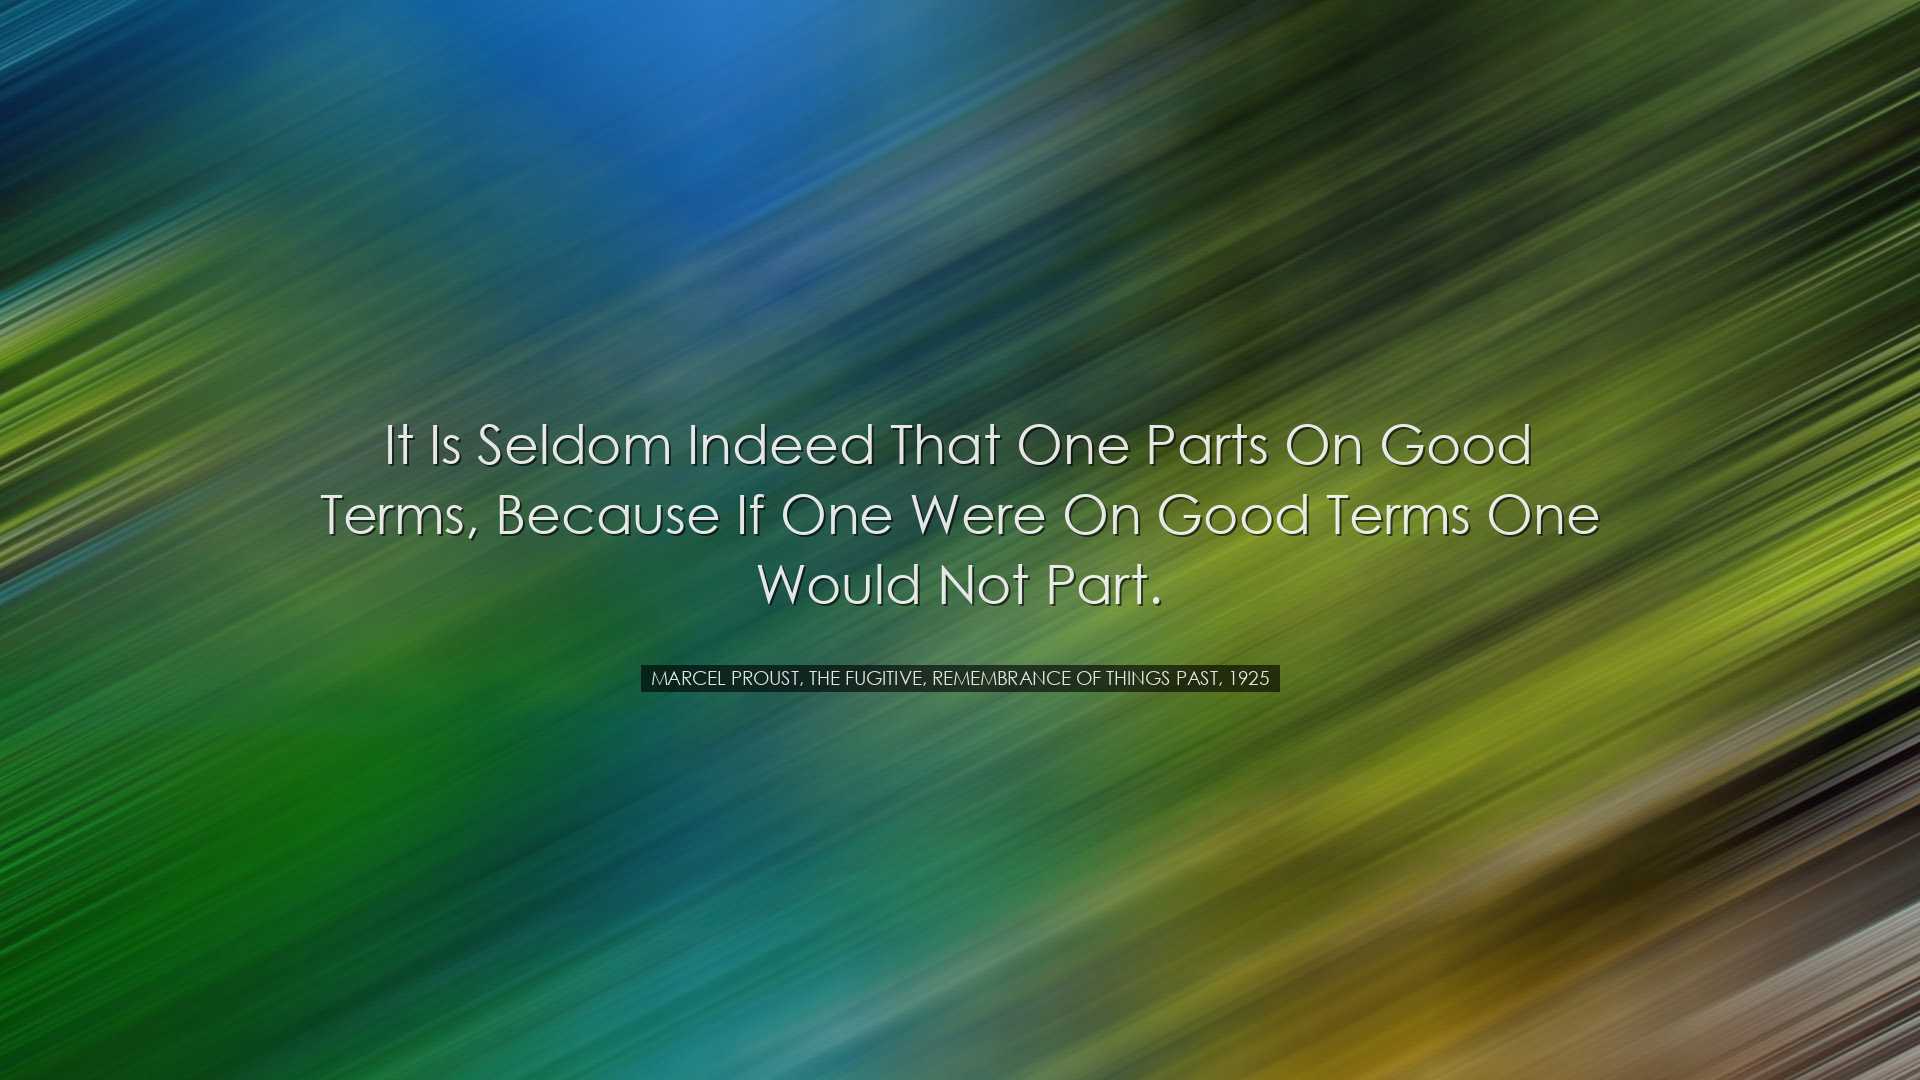 It is seldom indeed that one parts on good terms, because if one w